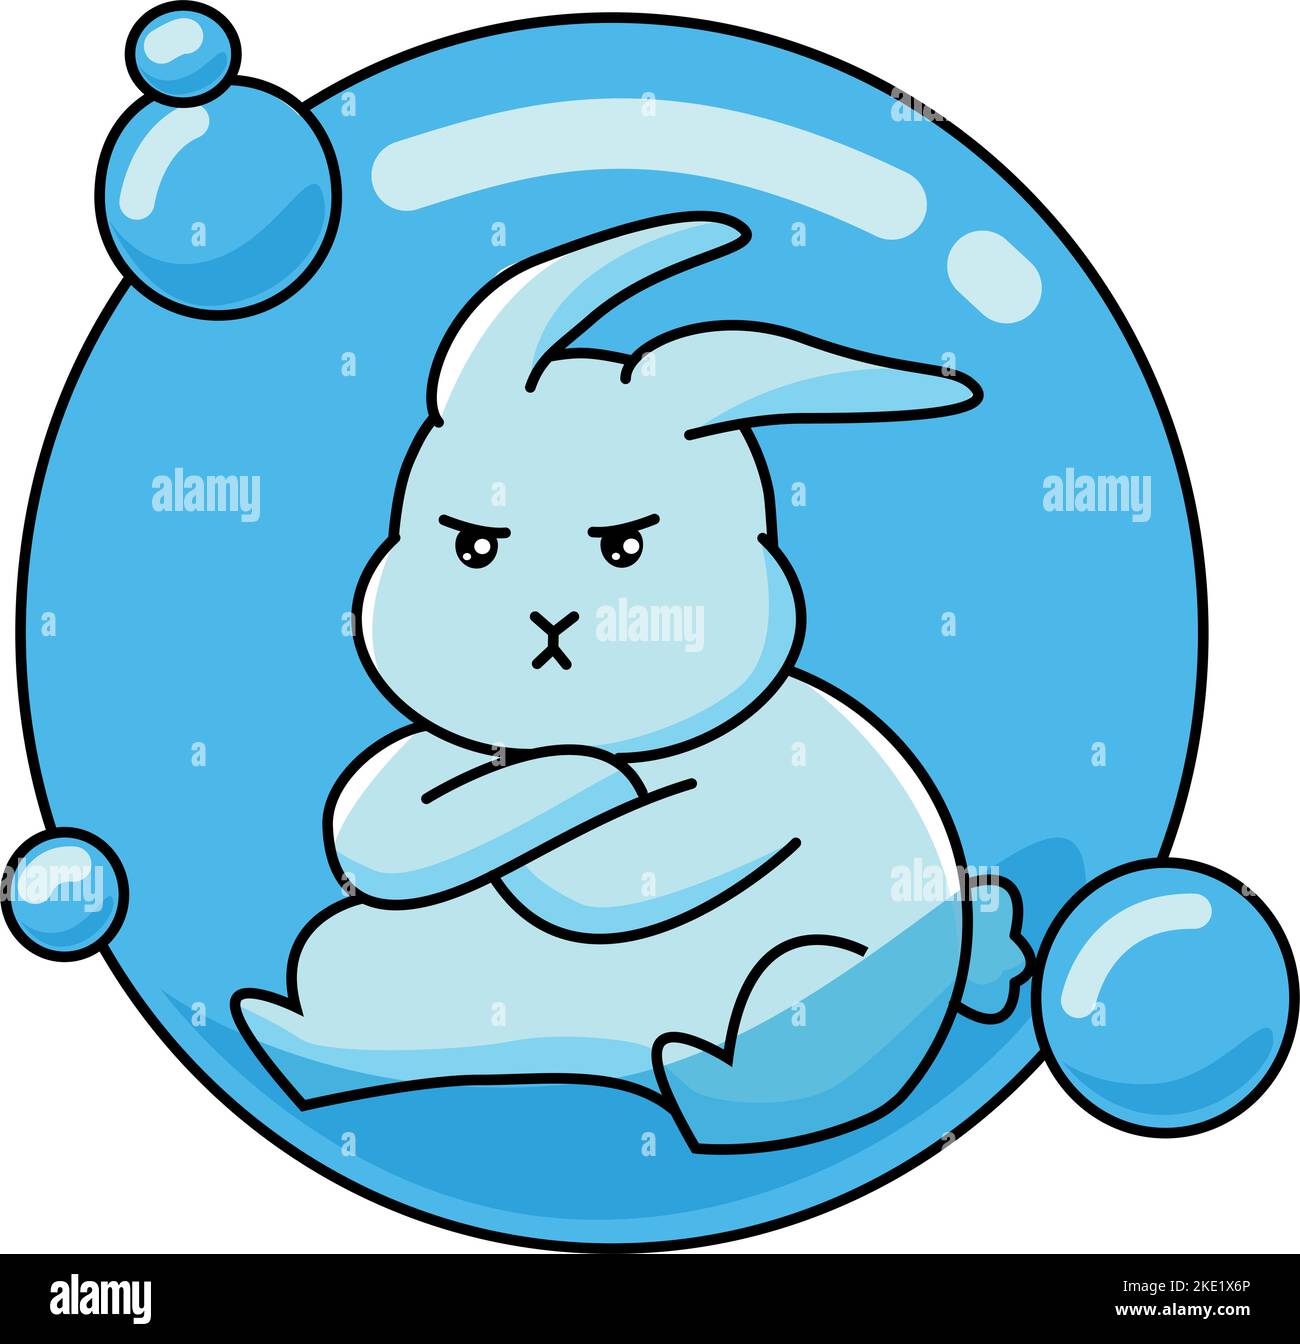 2,855 Angry Rabbits Cartoon Images, Stock Photos, 3D objects, & Vectors